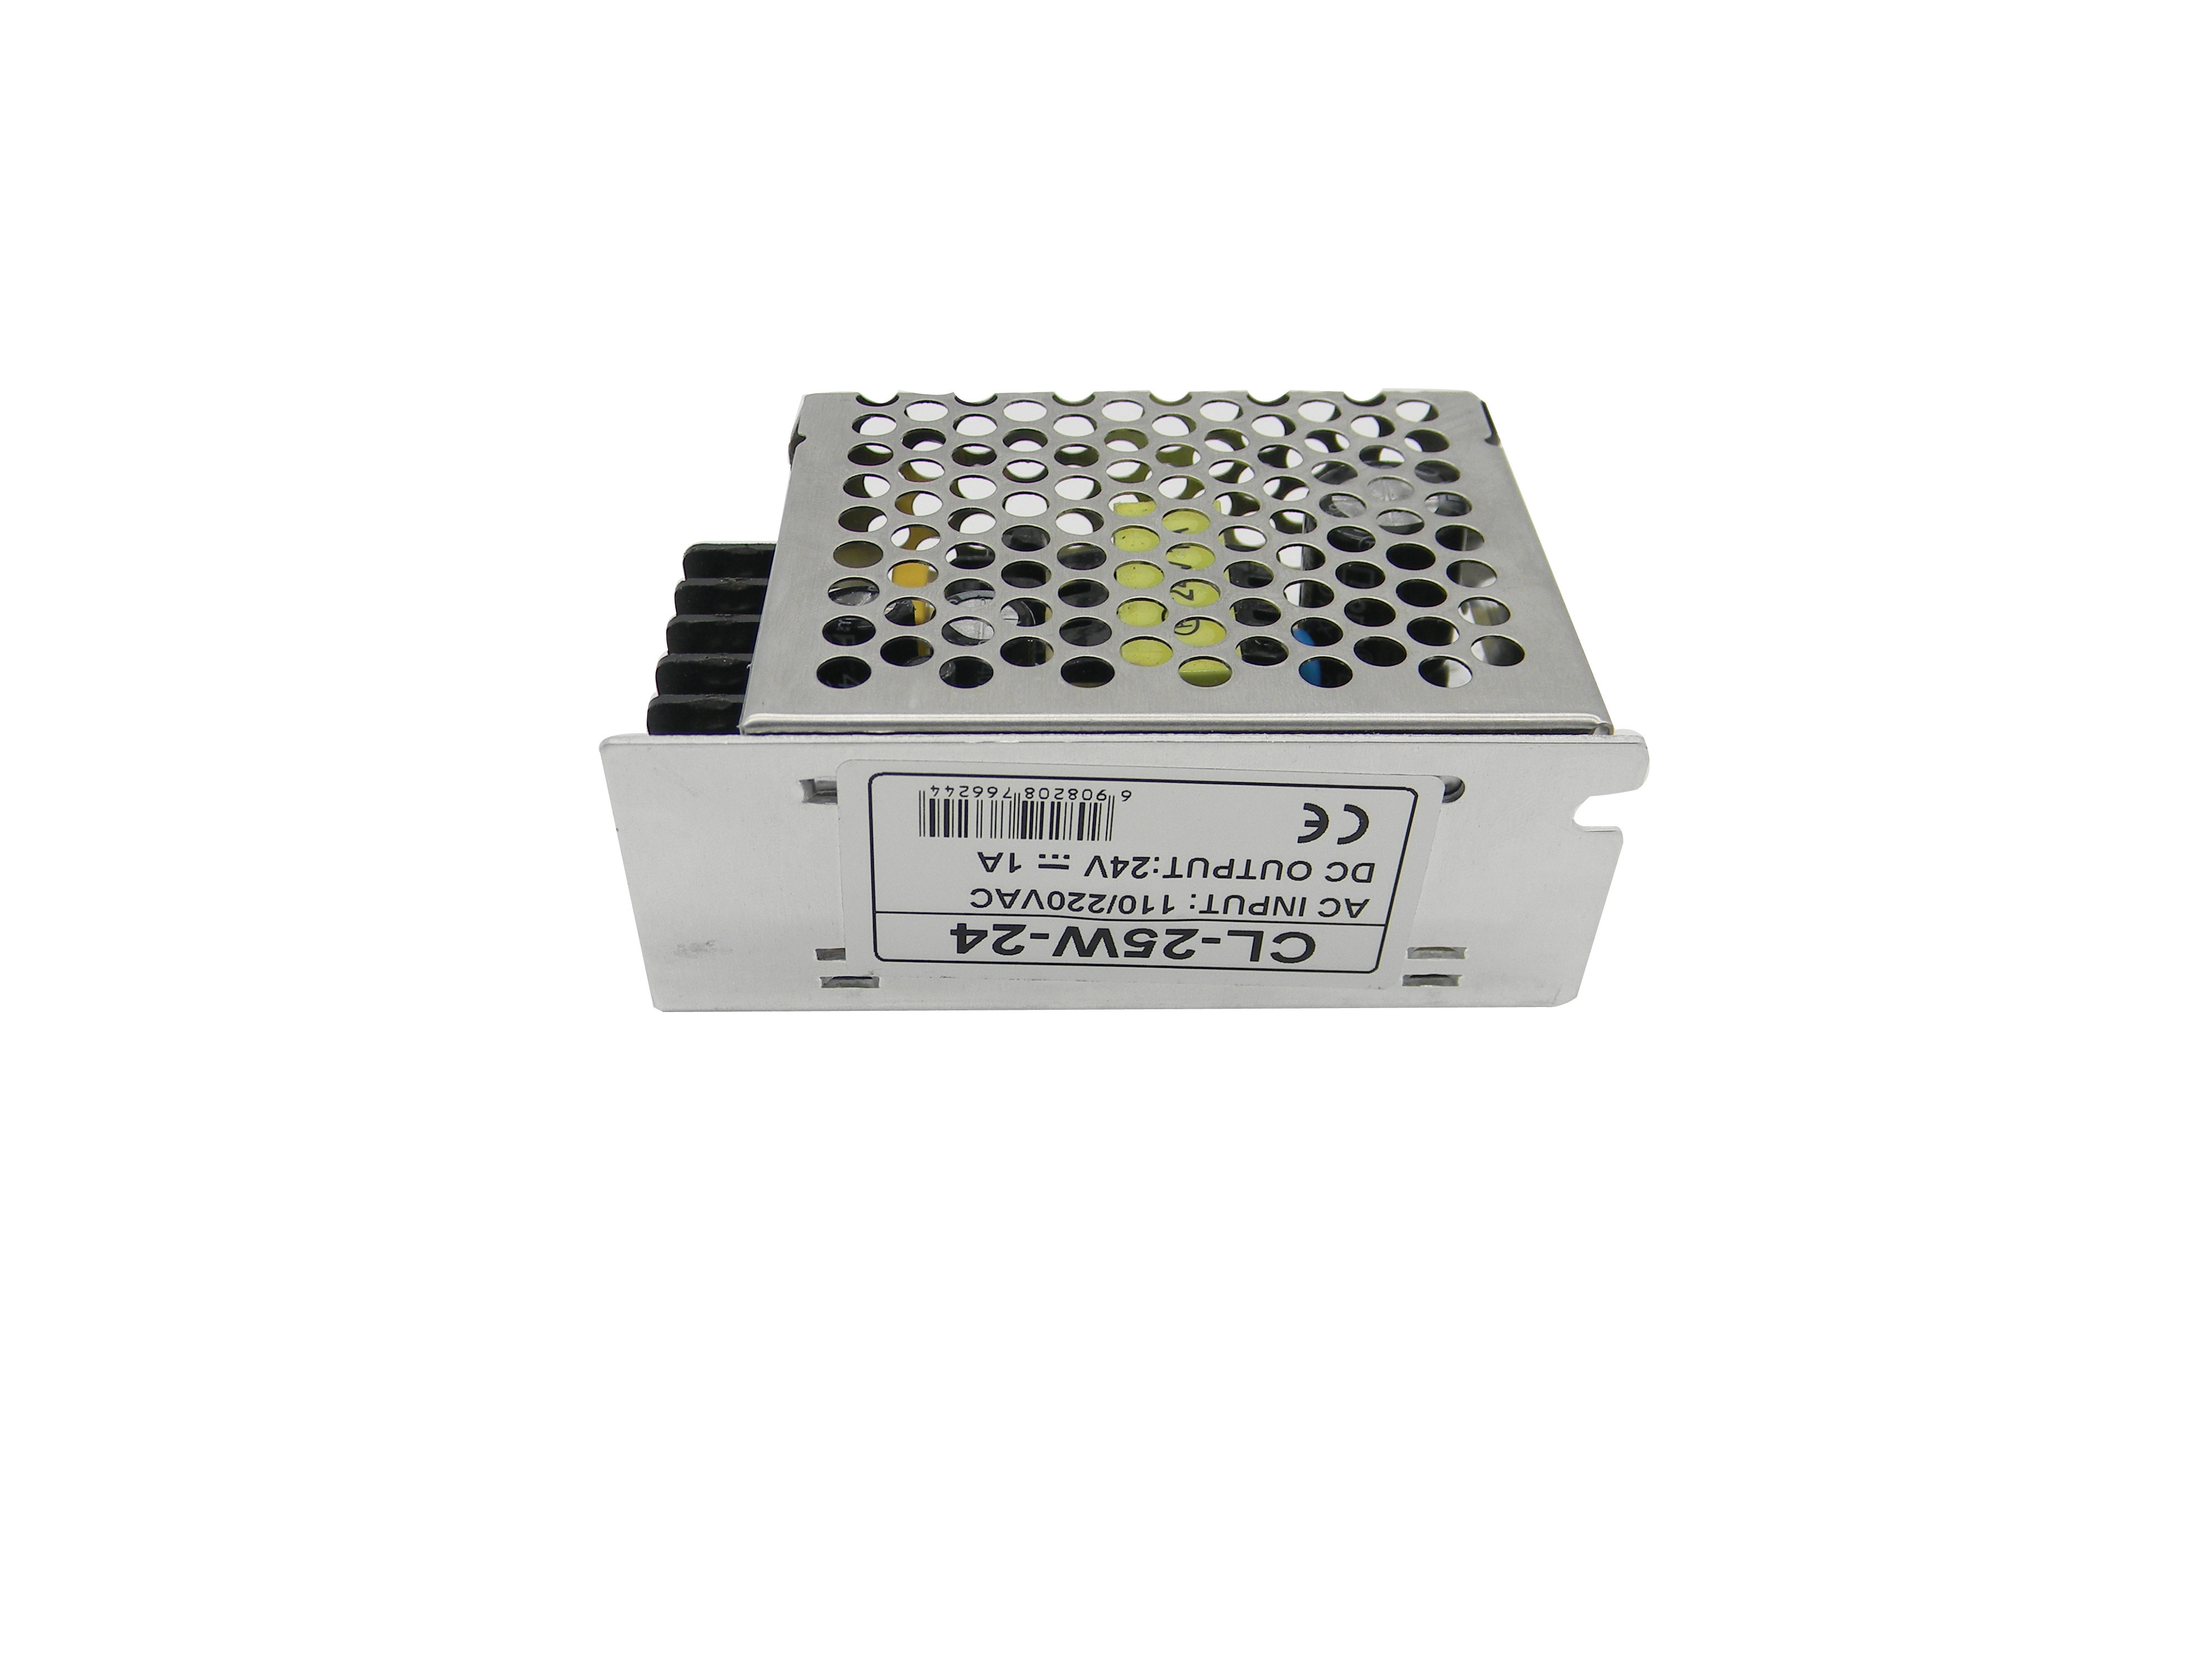 Kim loại cased Switching Mode Power Supply Output 24V 1.25A